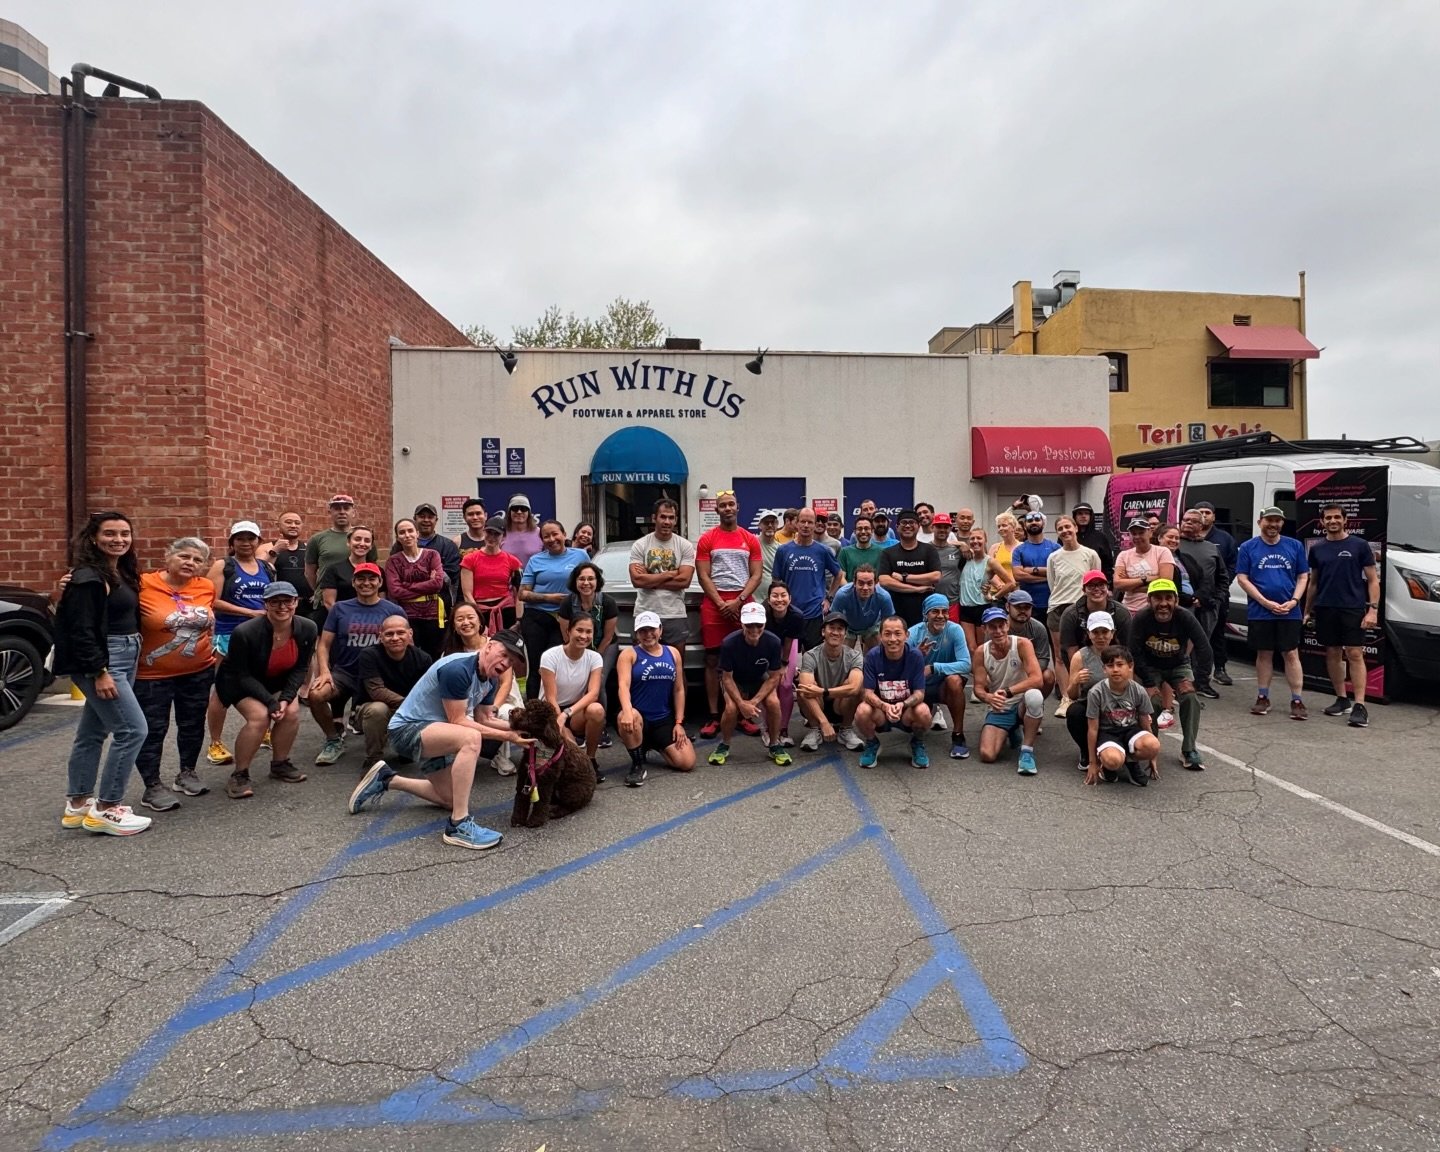 These temps are heating up and so are our Monday Fun Runs! Grab a friend and kick off the week with us tonight for our weekly 4 and 6 milers!! 

Here are the run details:
➡️ Location: Run With Us Parking Lot (235 N. Lake Ave)
➡️ Time: 6pm
➡️ Distance